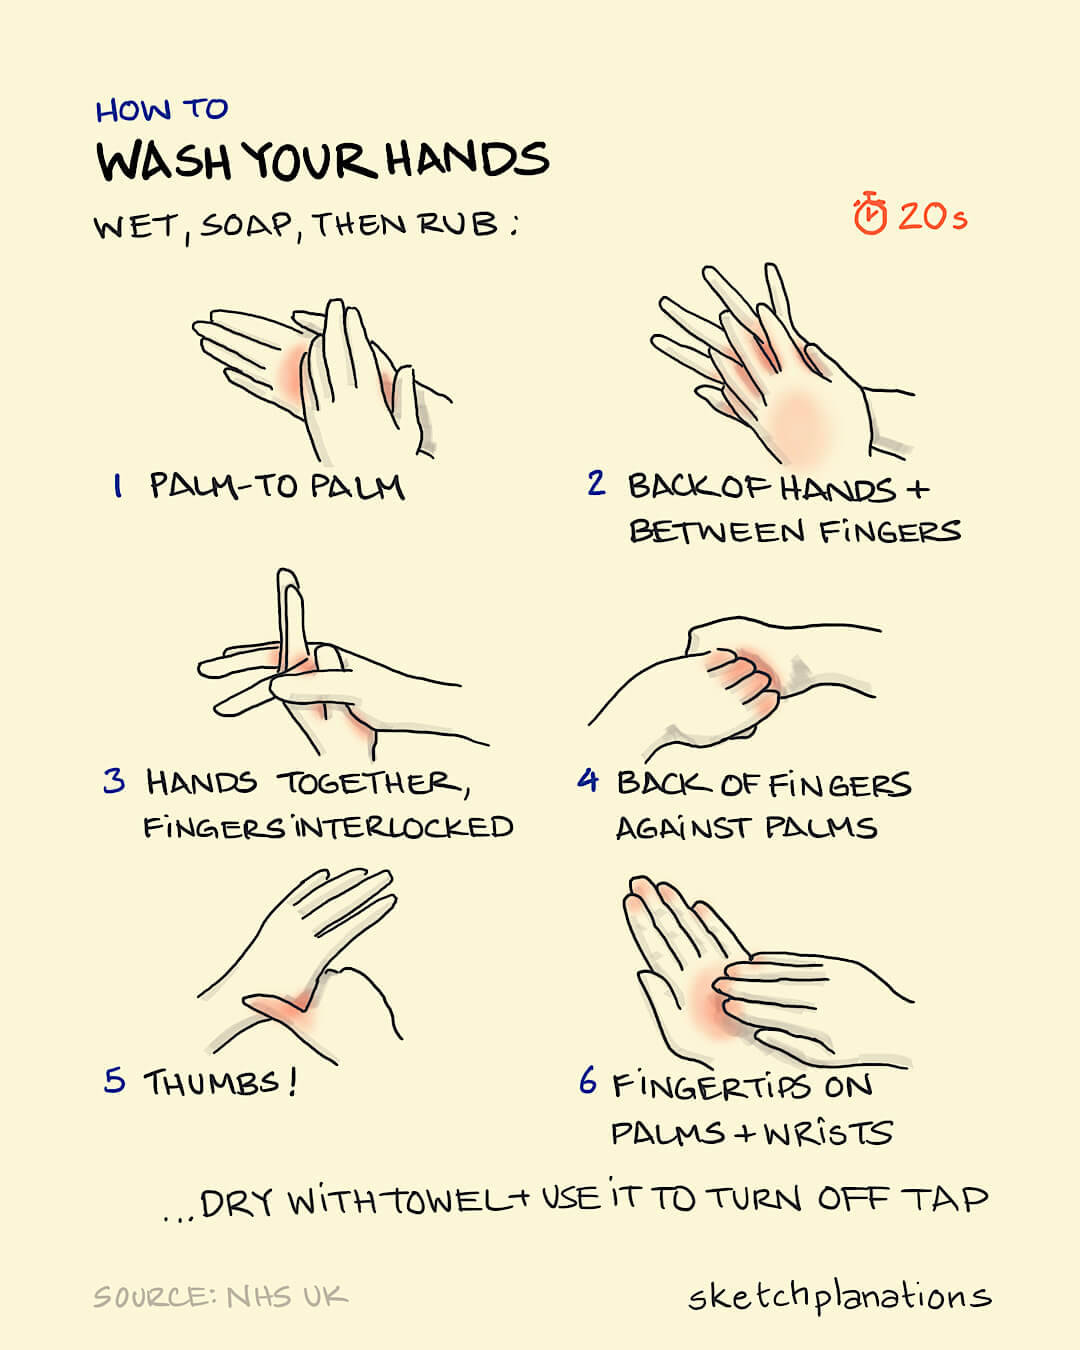 How to wash your hands In these times, and to be honest most times, washing your hands well is one of the very best things you can do to keep yourself healthy and free from infections.You should use soap if you have it, it should take about 20s, and...